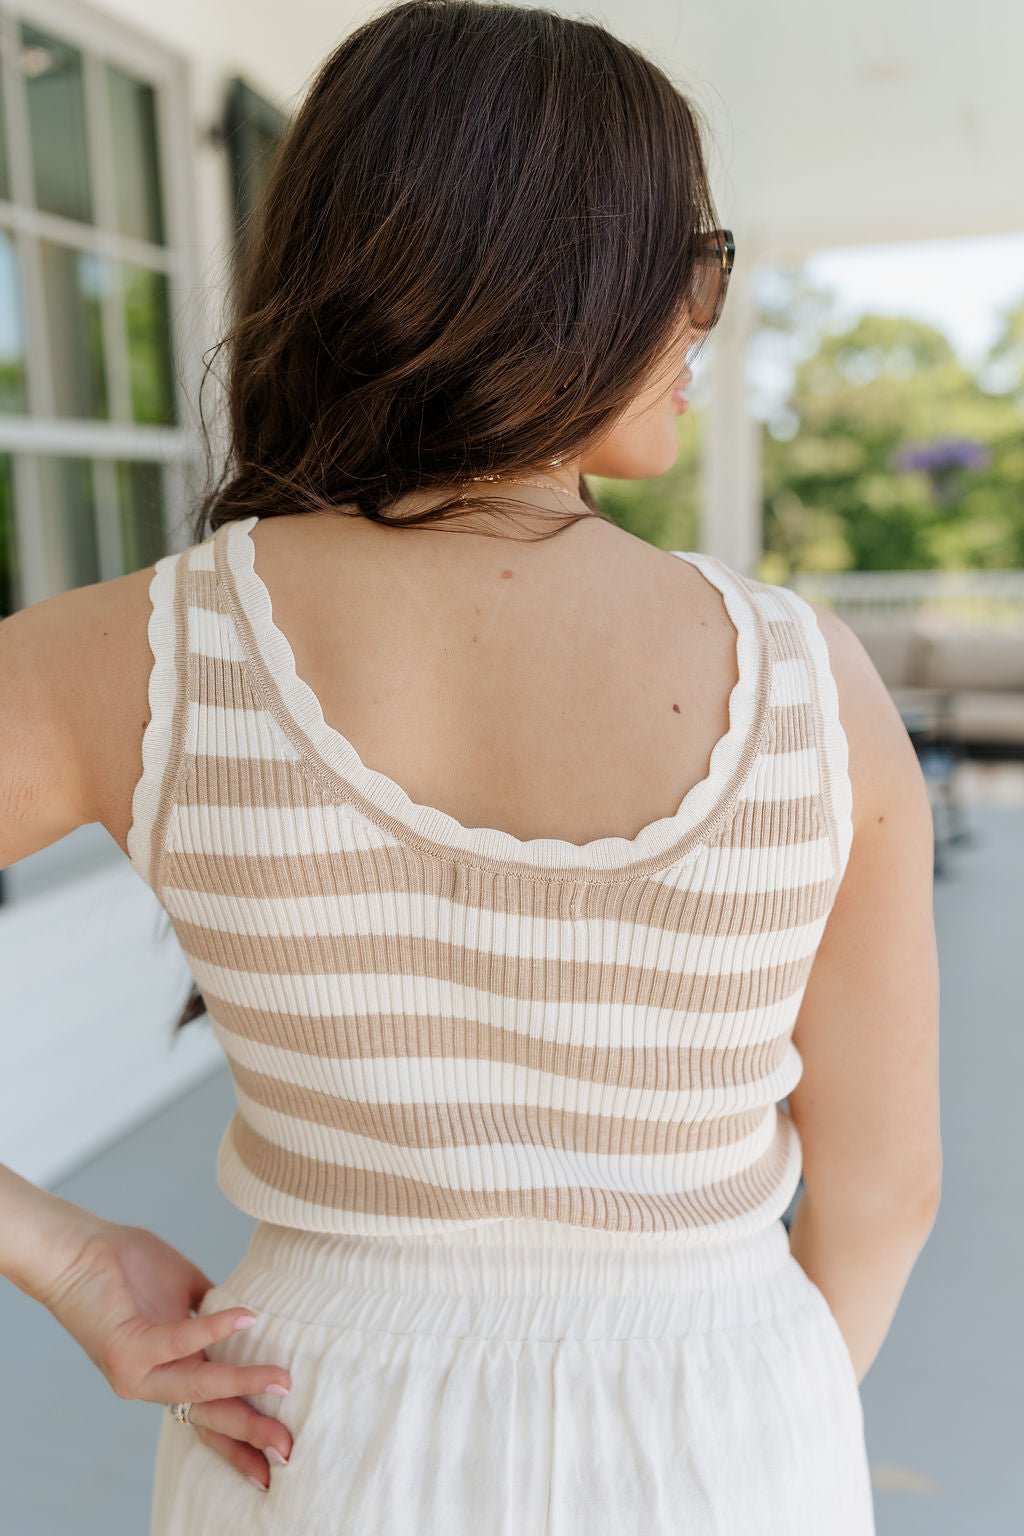 Upper body back view of brunette female model wearing the Nora Striped Tank Top in Taupe that has horizontal taupe and off white stripes, a scoop neck, scallop trim, and ribbed fabric. Top is shown tucked into shorts.